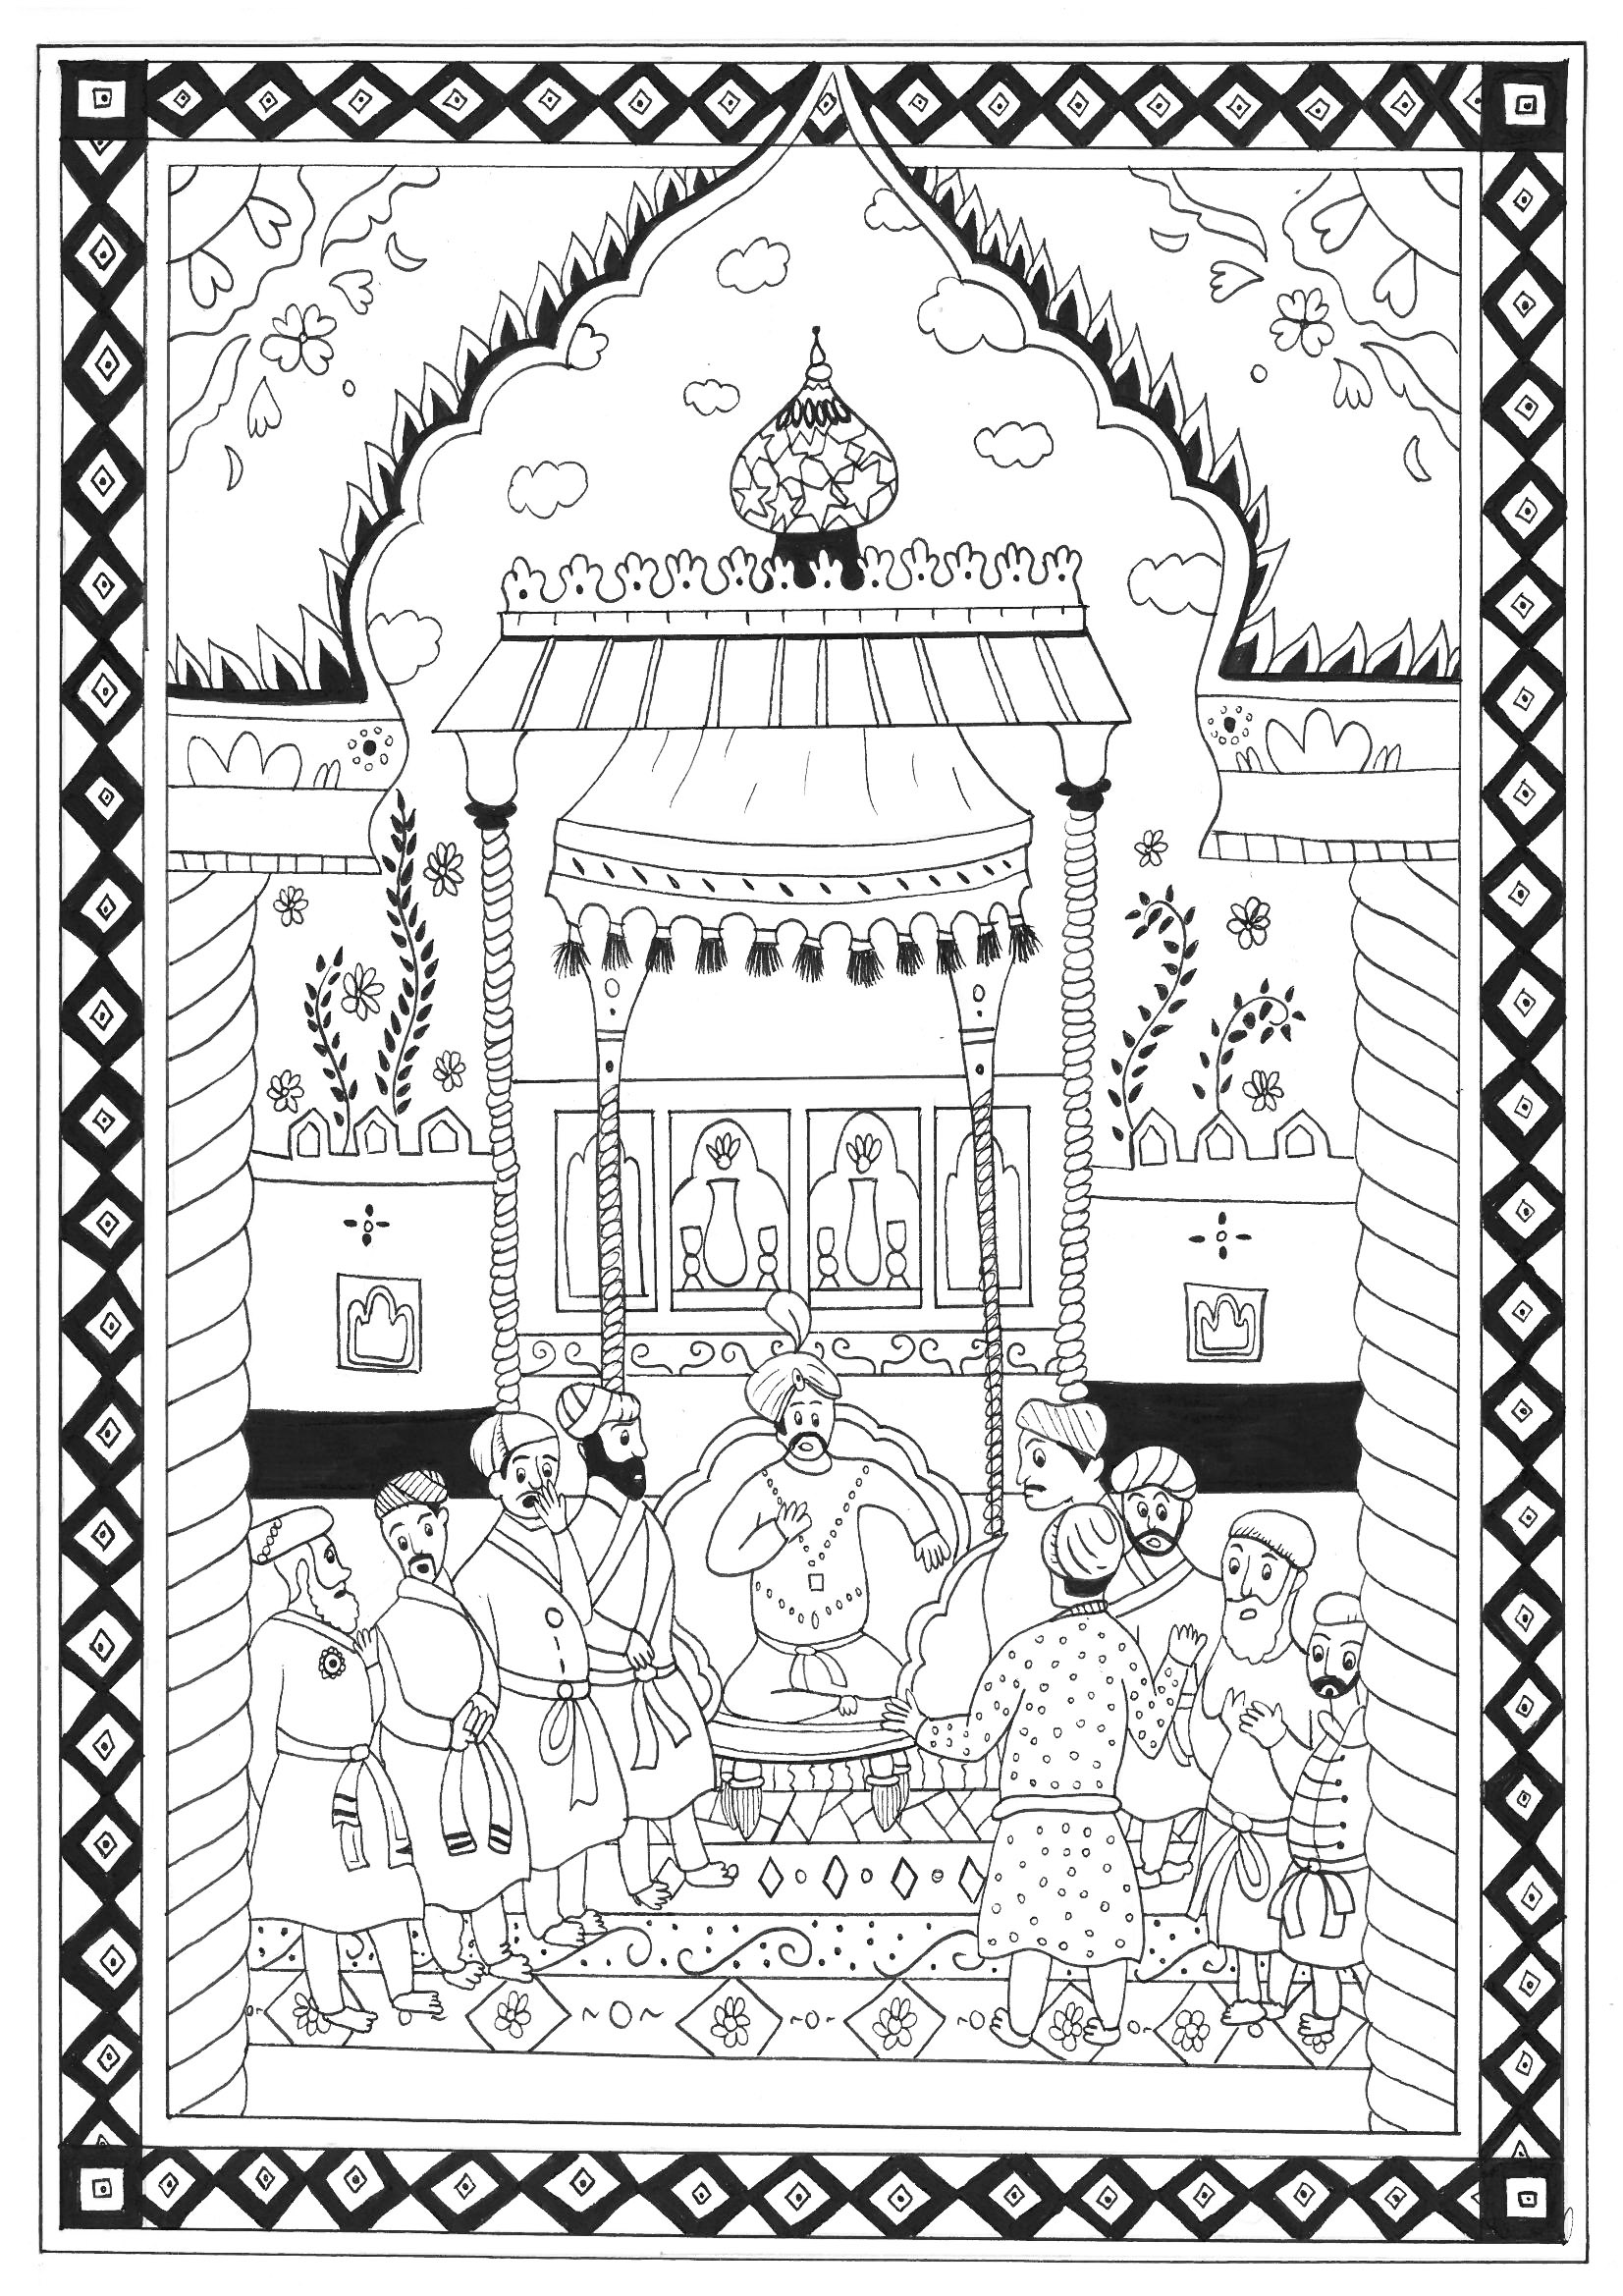 Several Maharajas in an oriental palace. The work 'One Thousand and One Nights' was collected over many centuries by various authors, translators, and scholars across West, Central, and South Asia and North Africa. The tales themselves trace their roots back to ancient and medieval Arabic, Persian, Mesopotamian, Indian, and Egyptian folklore and literature, Artist : Rachel